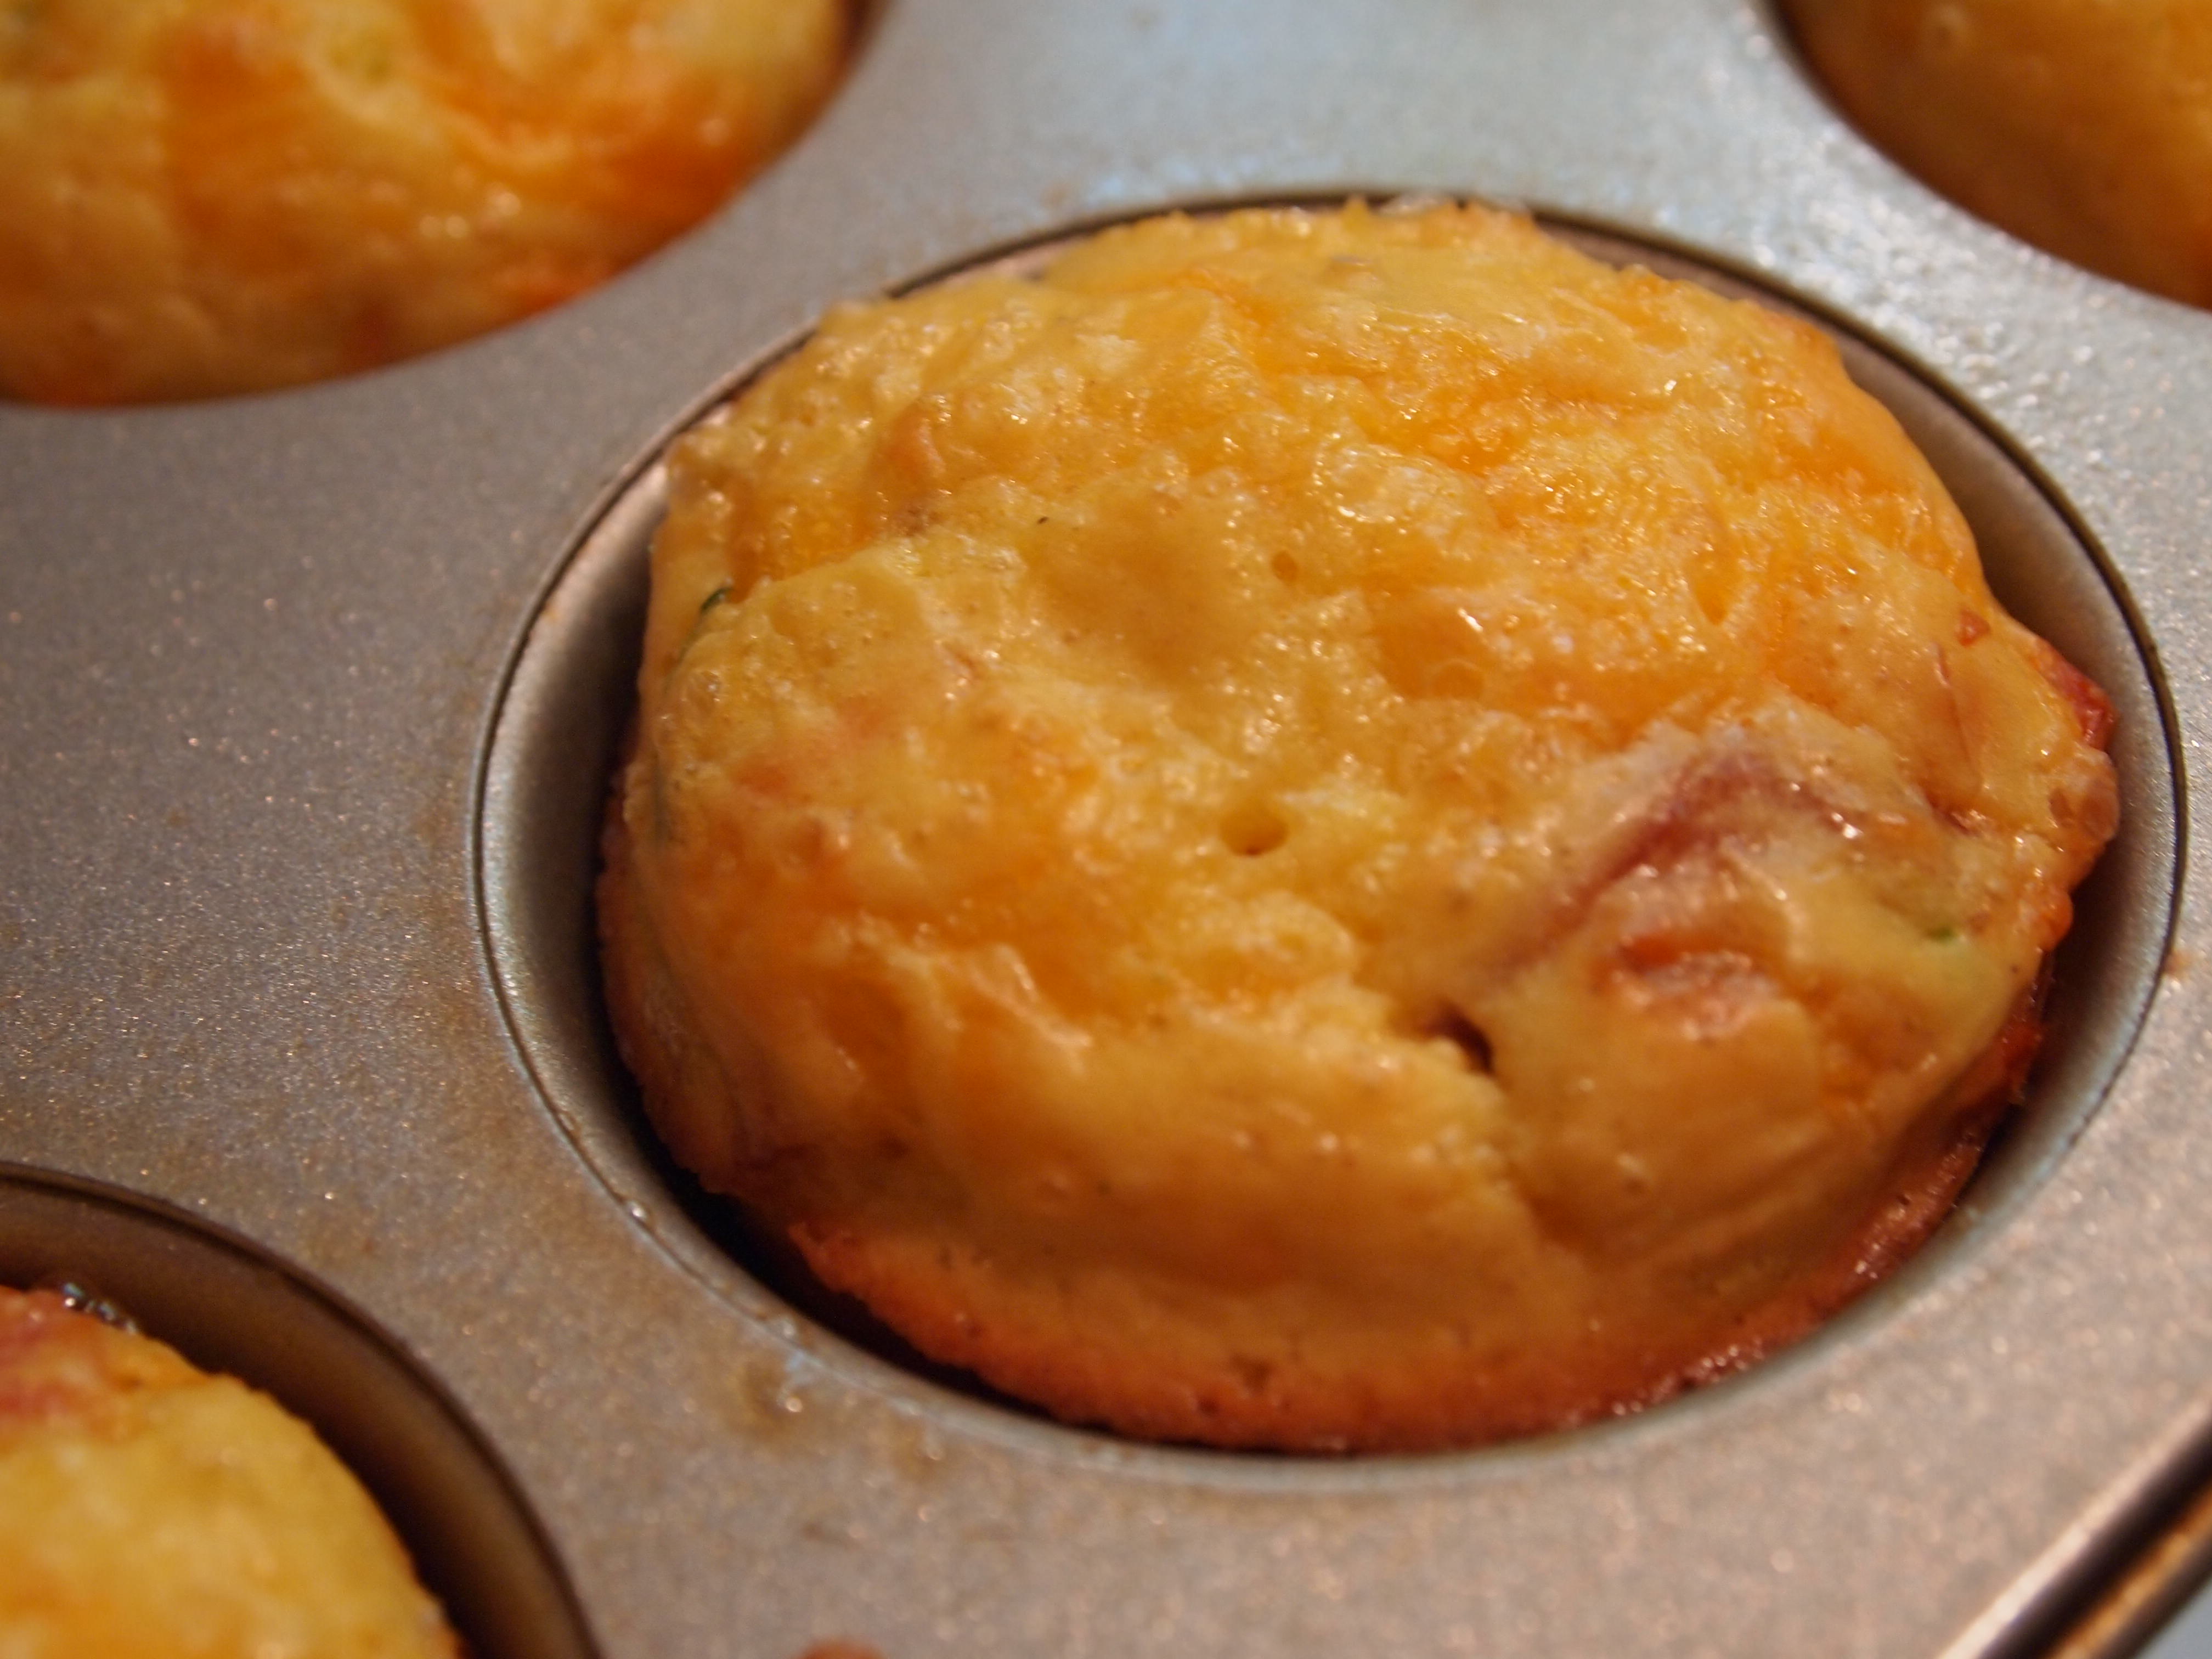 Omelette Muffins post-oven.